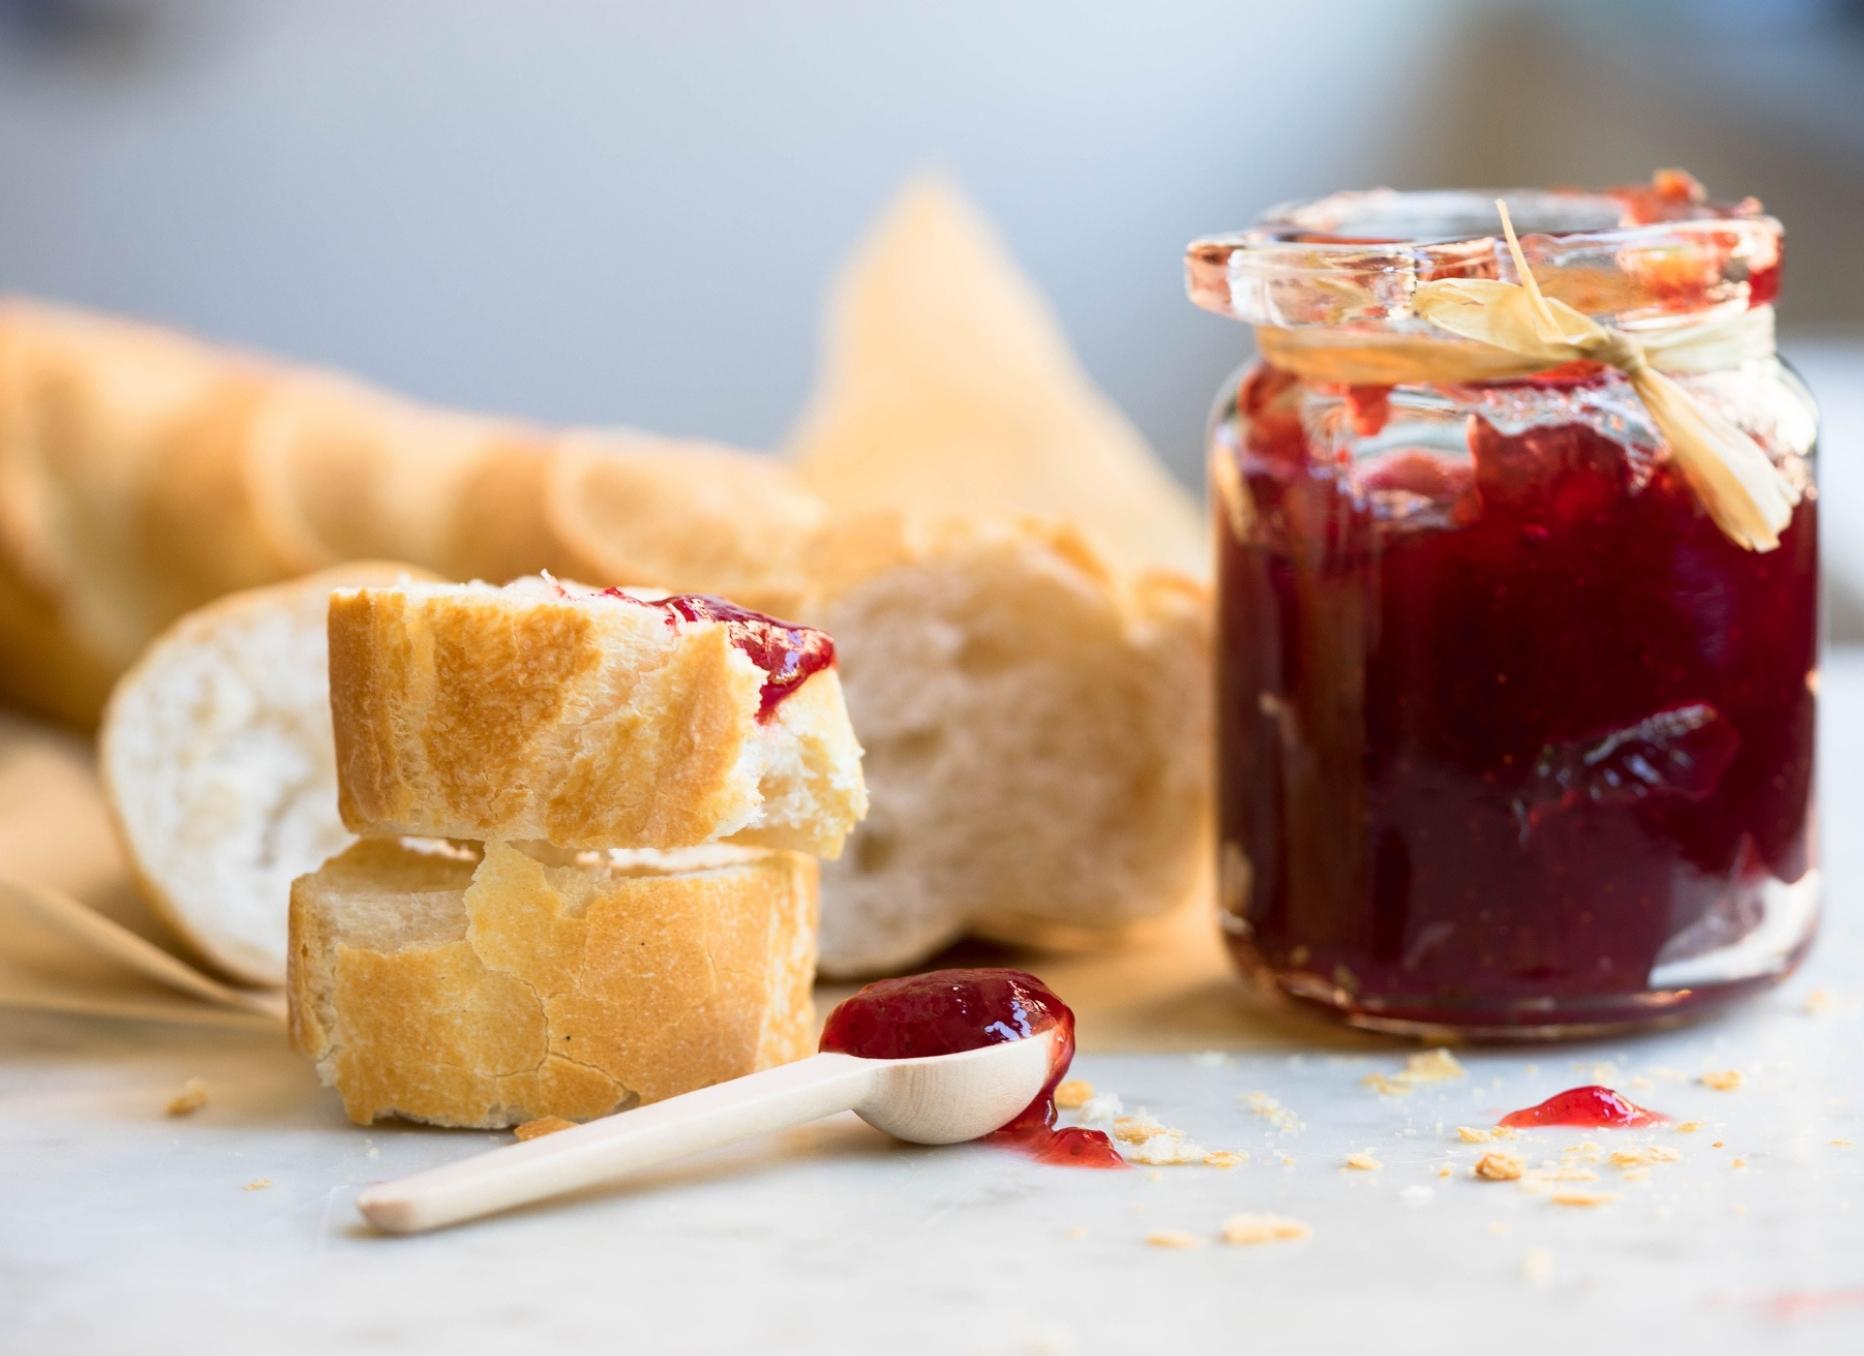 bread and jam